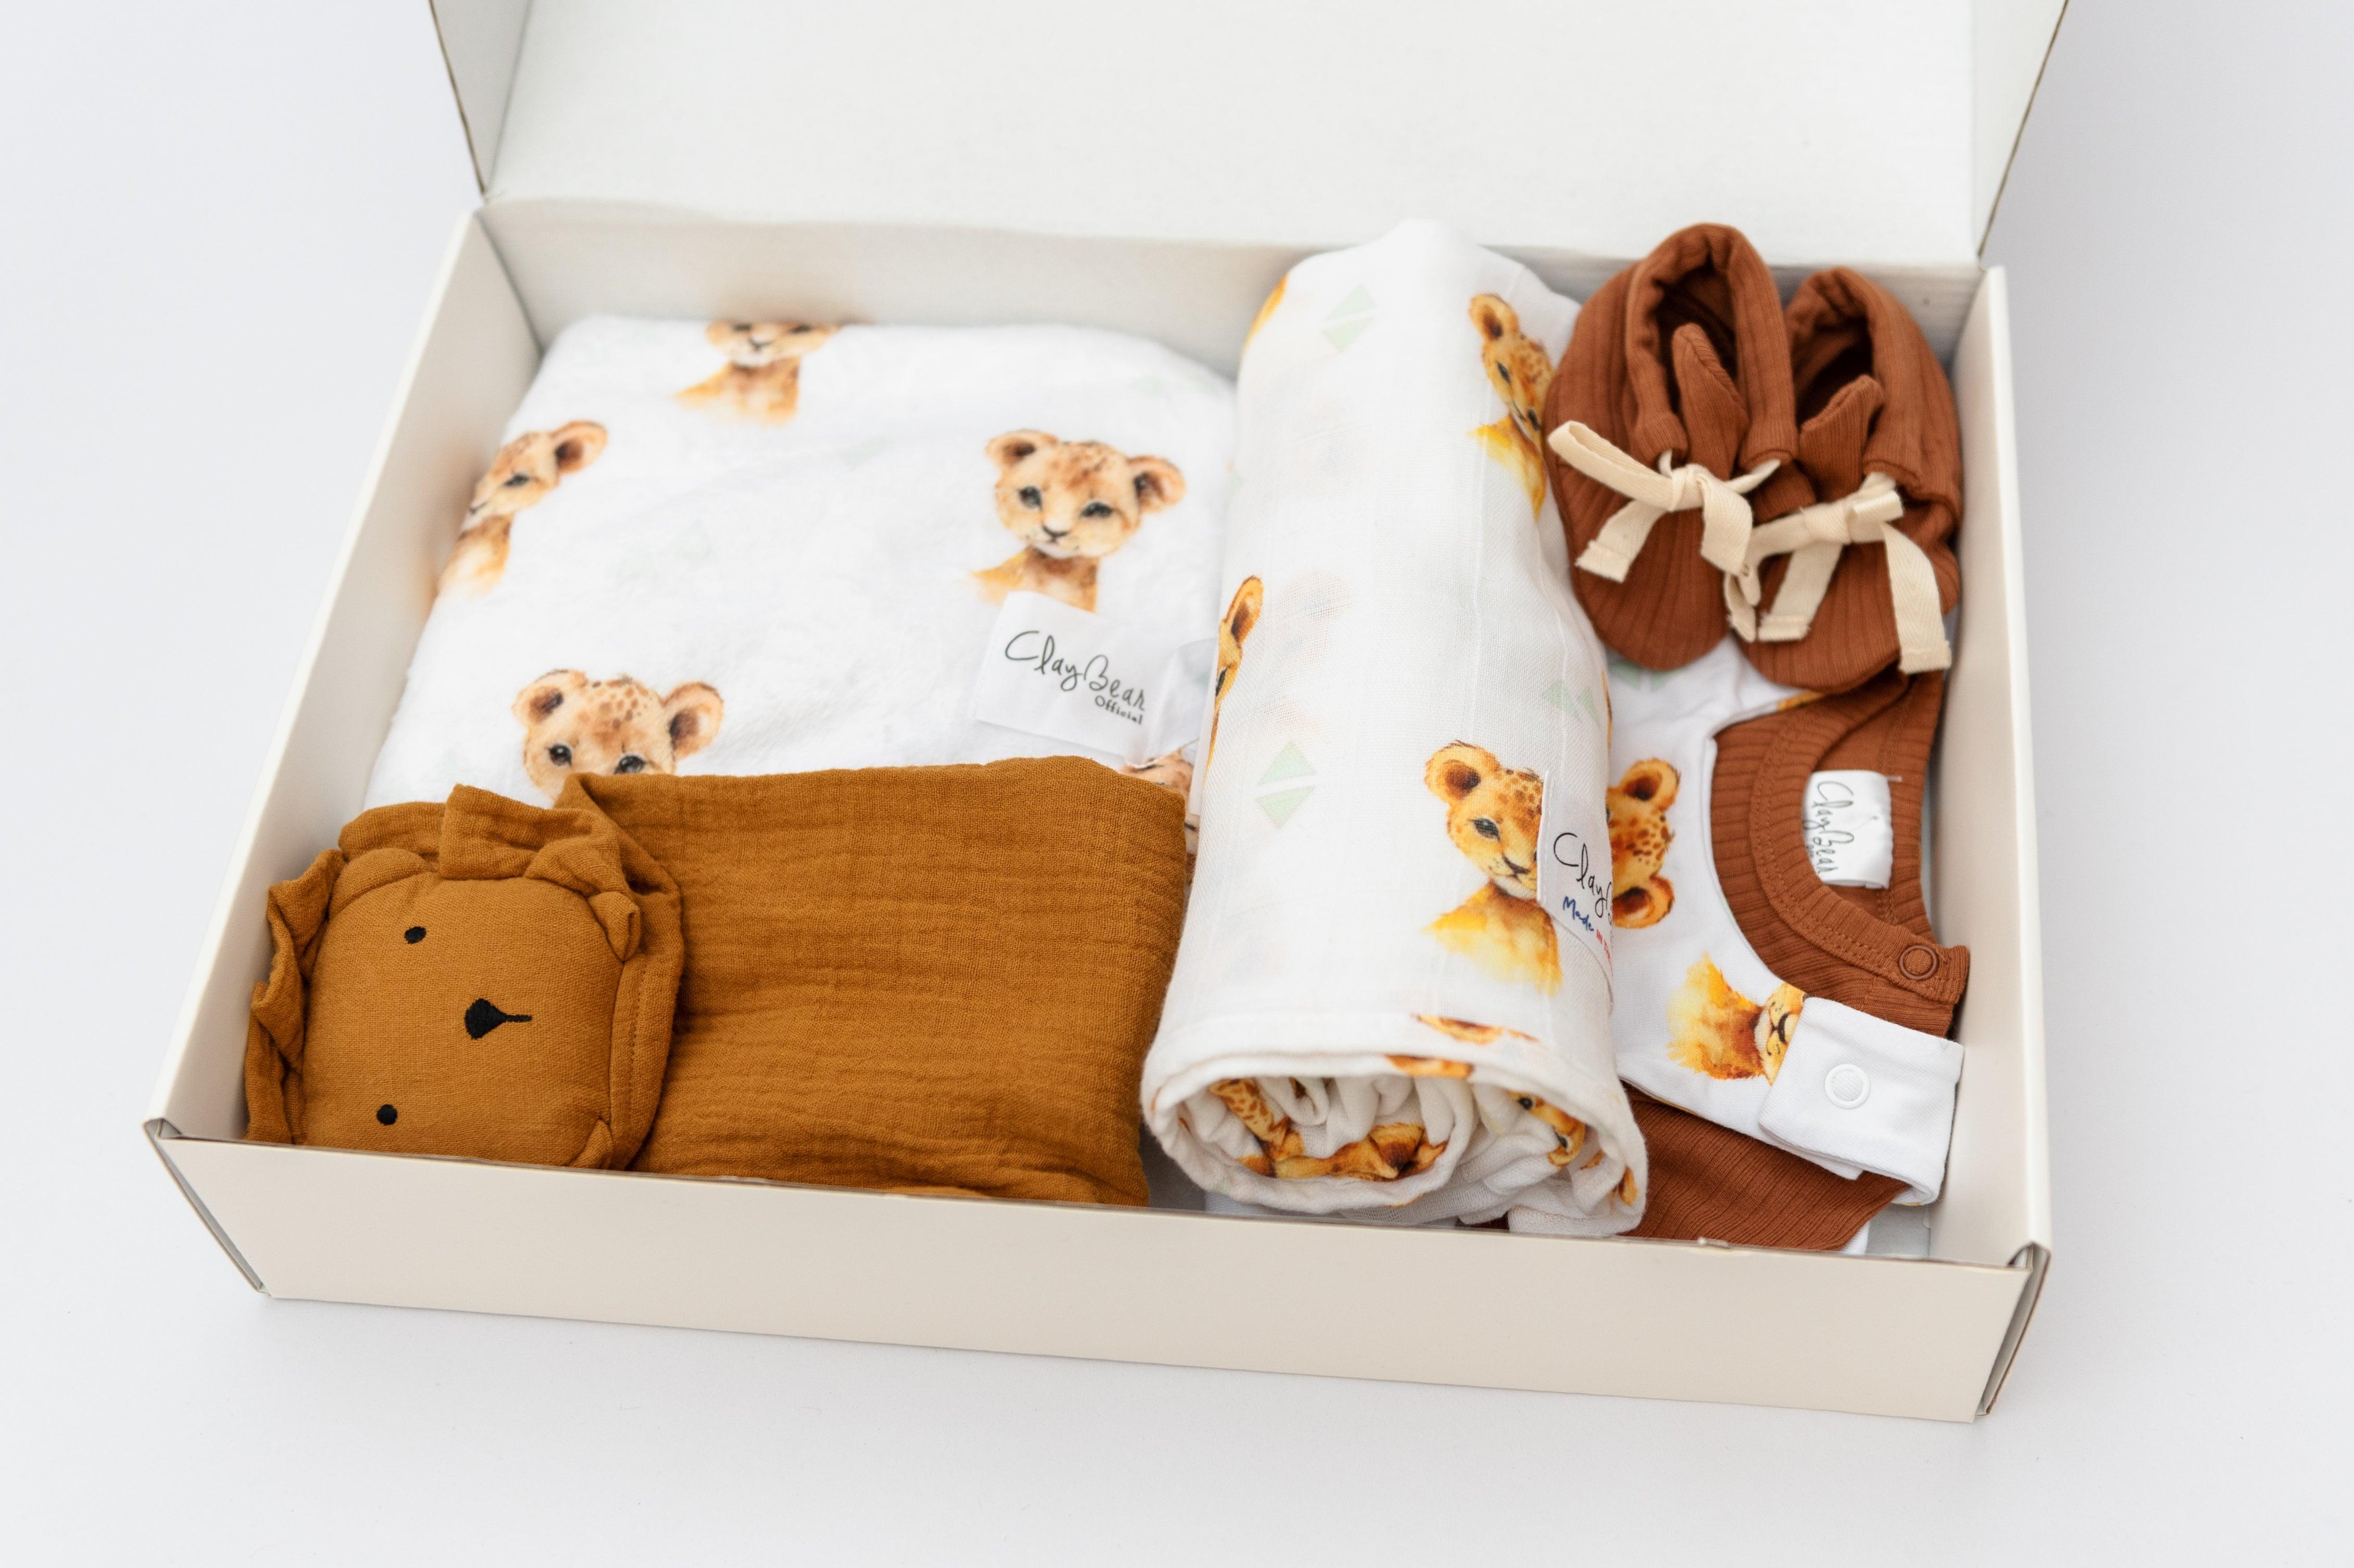 files/new-baby-gift-box-lion-cub-claybearofficial-7.jpg